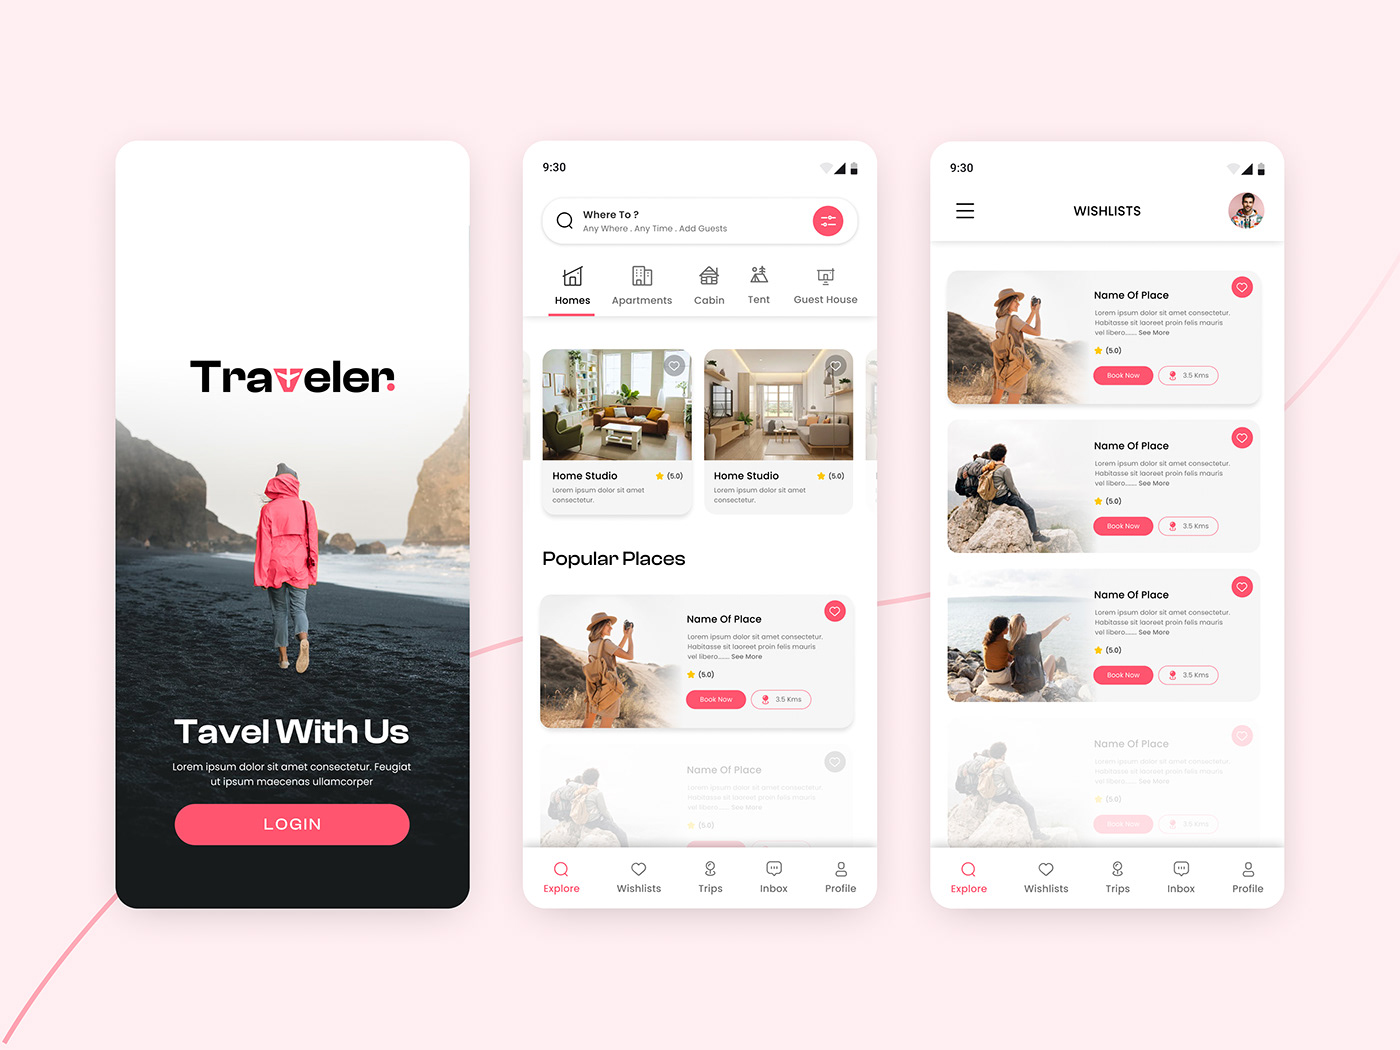 This is a App Design Inspired from Airbnb App